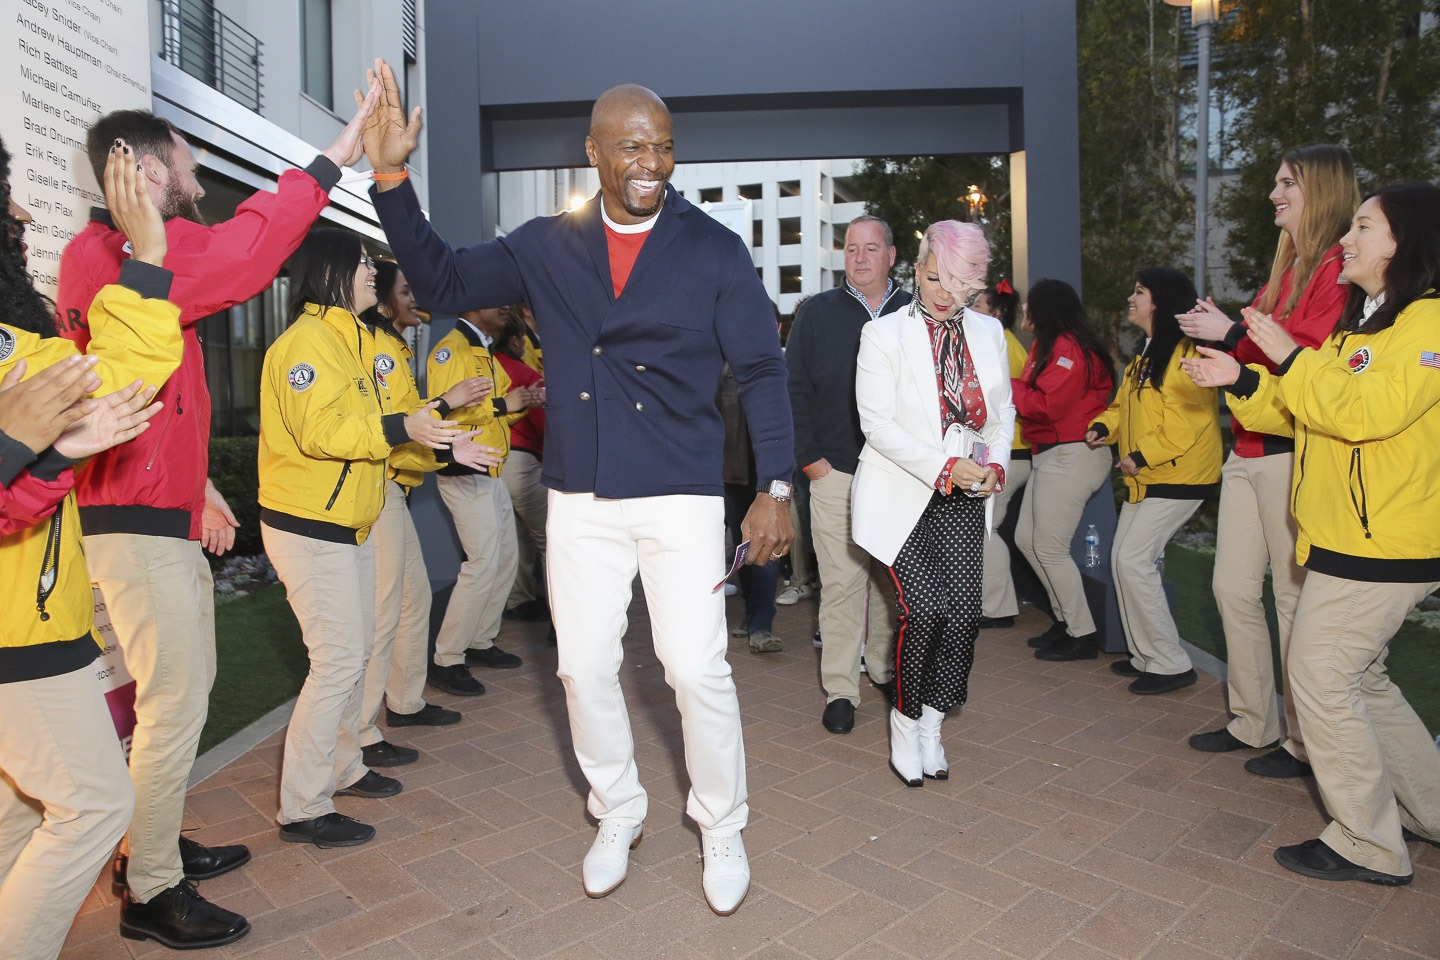 AmeriCorps members cheer as Terry Crews and other celebrities arrive at a City Year event